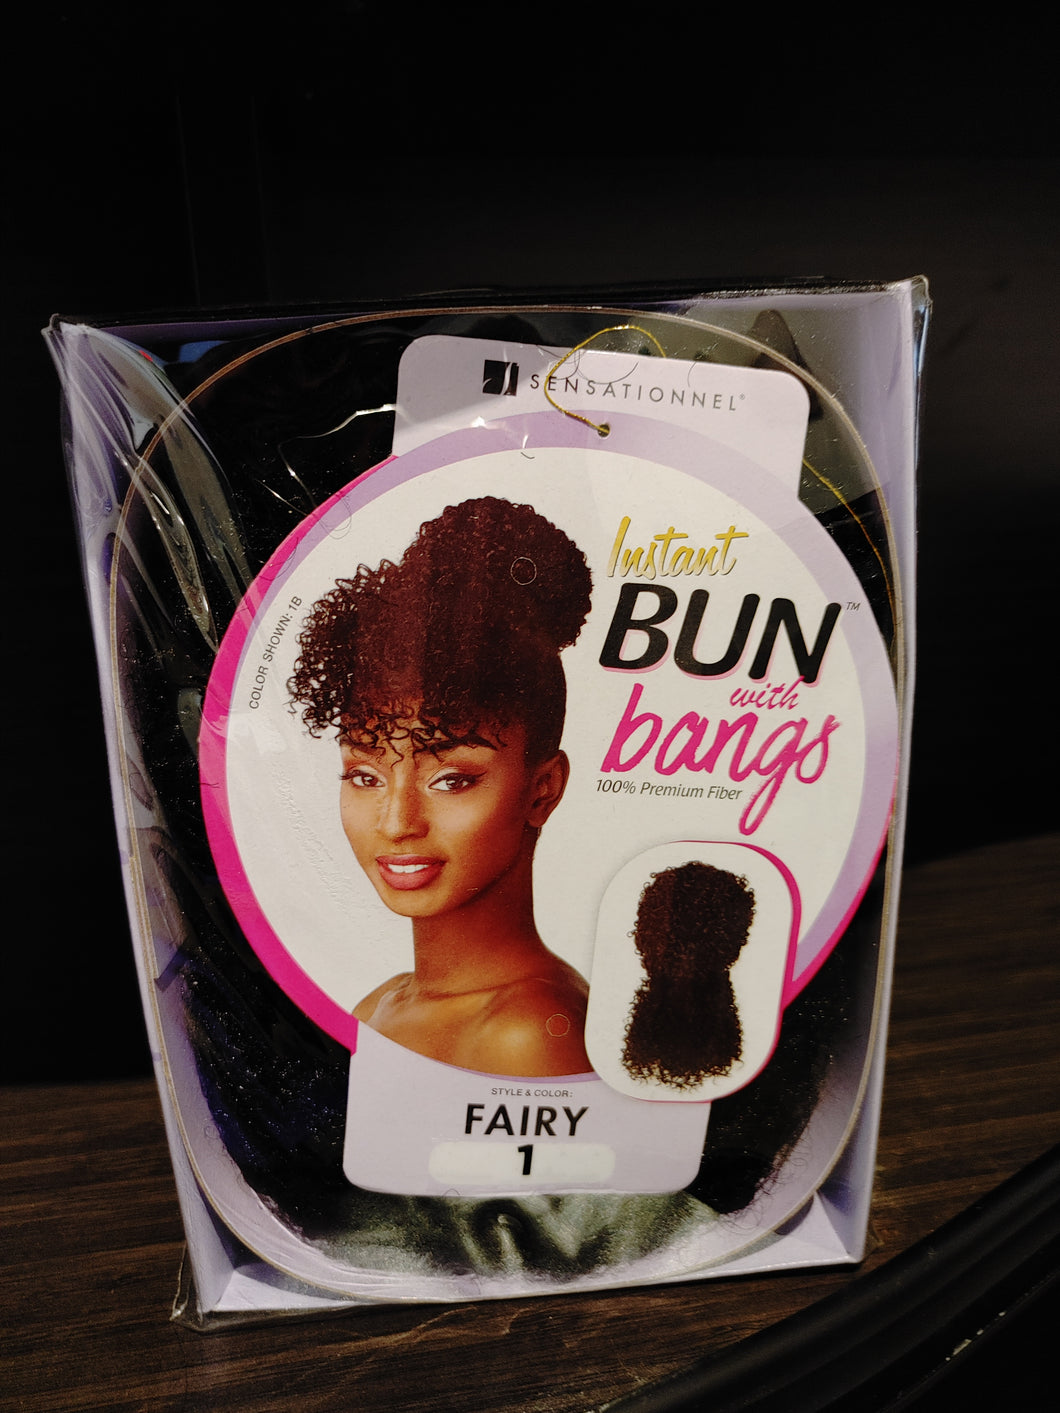 Instant Bun with Bangs